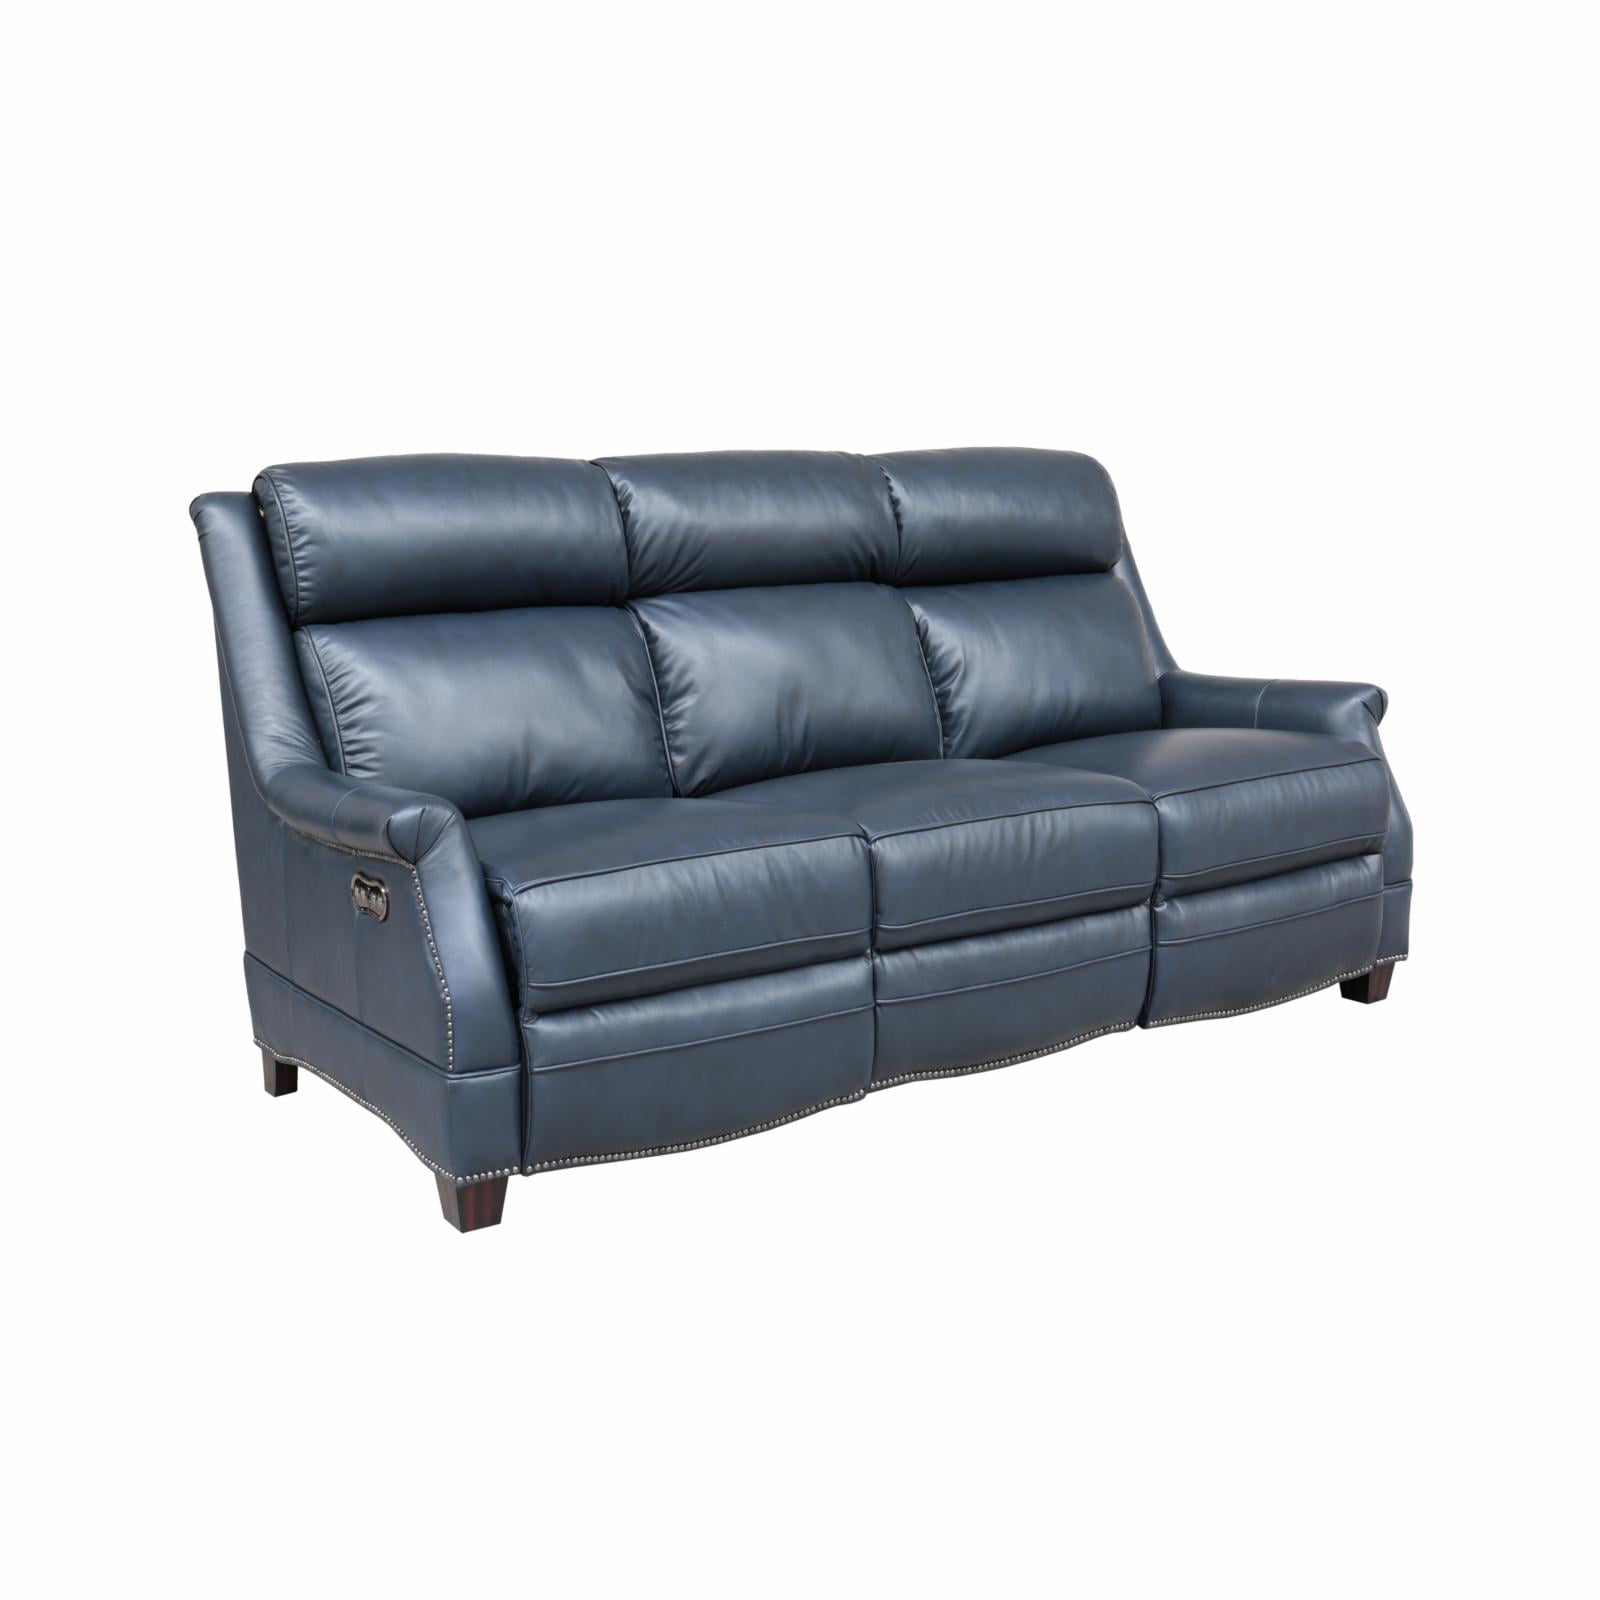 Barcalounger Warrendale Leather Power, Barcalounger Leather Sofa